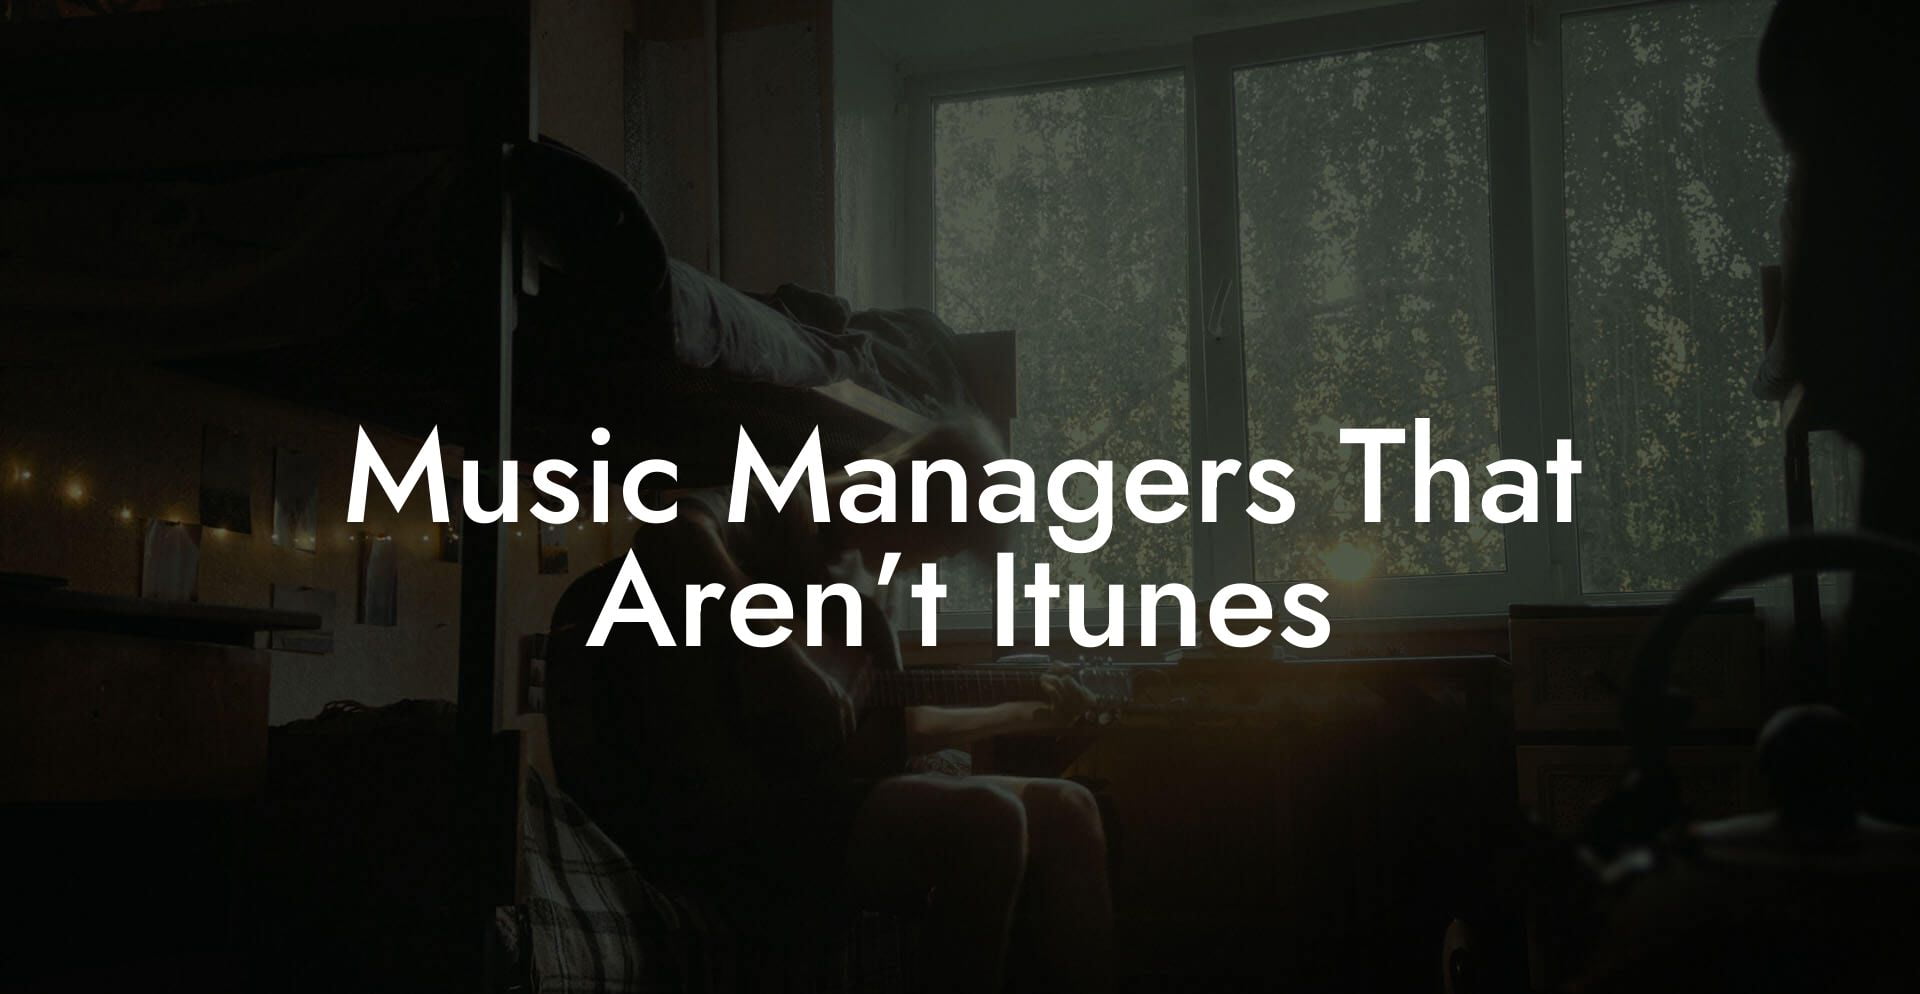 Music Managers That Arent Itunes